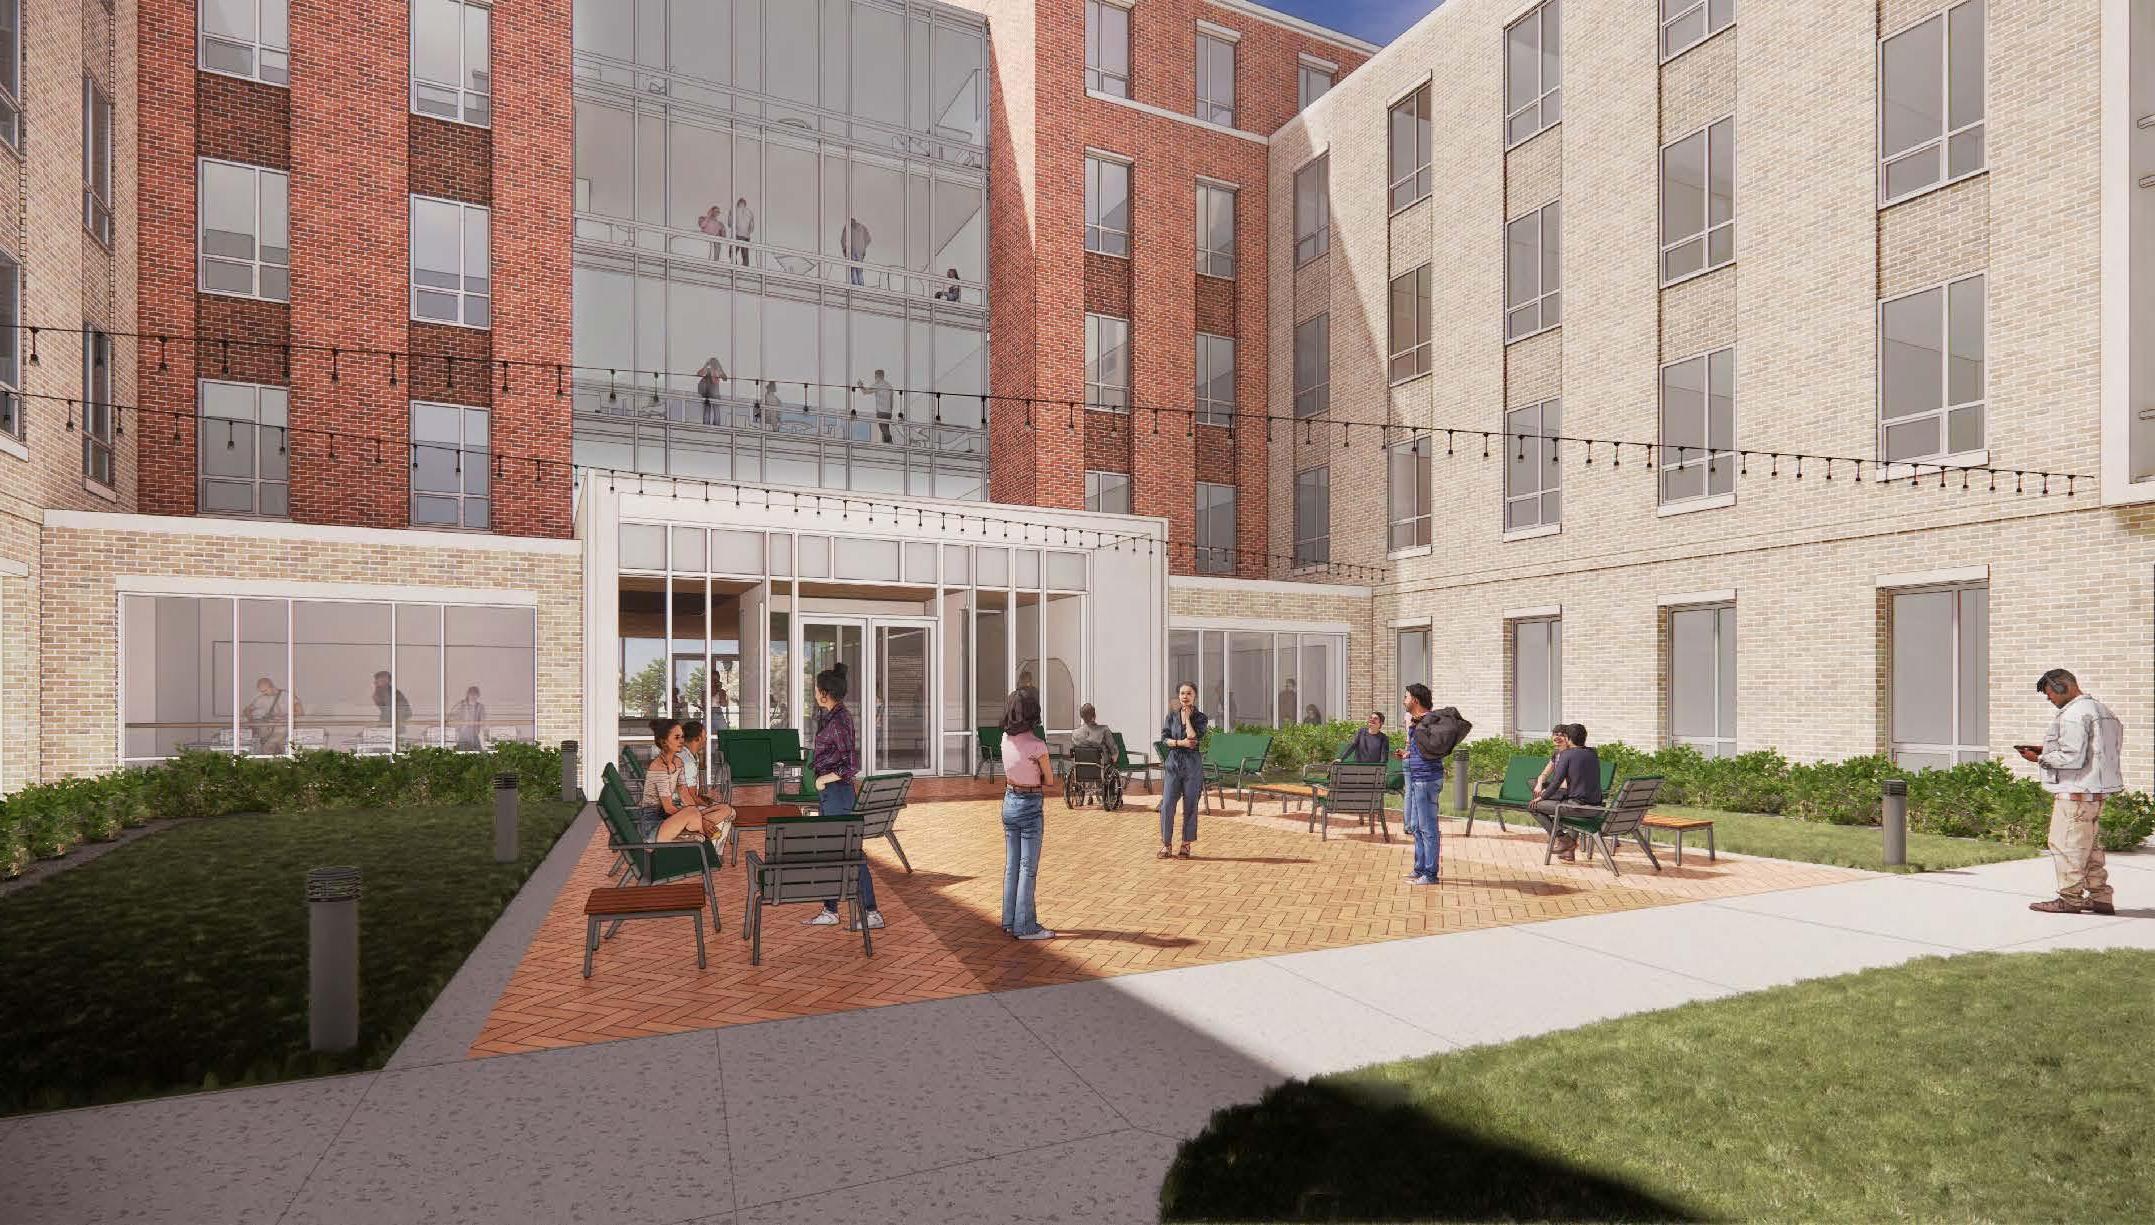 Building entry rendering for new South Green construction project